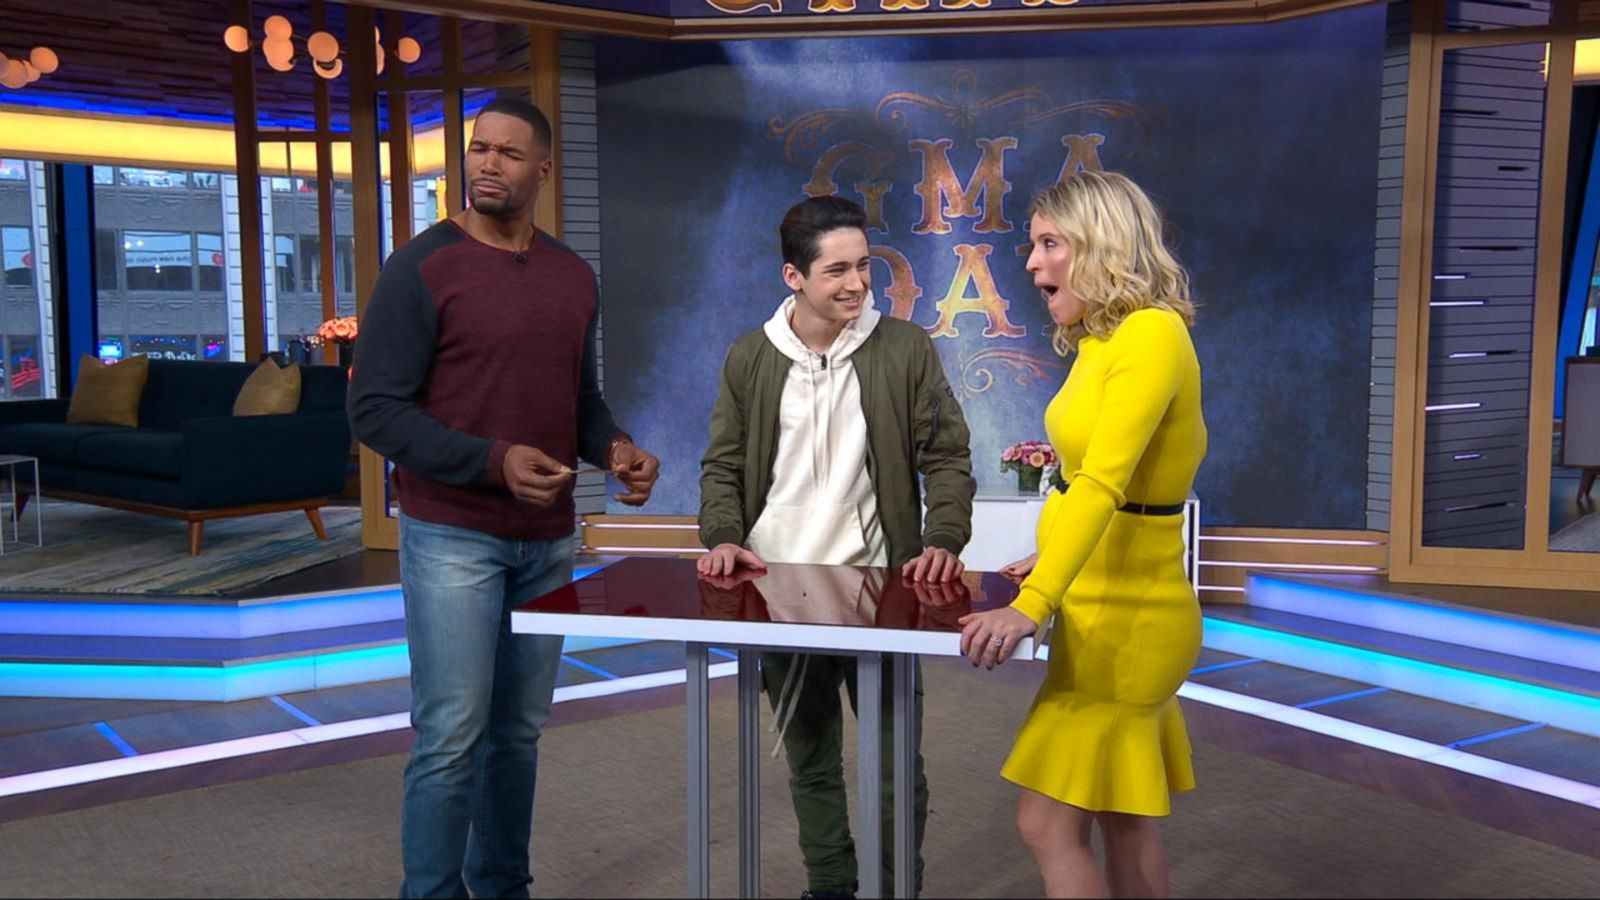 Kid magician Henry Rich performs magic tricks for Michael Strahan and ...